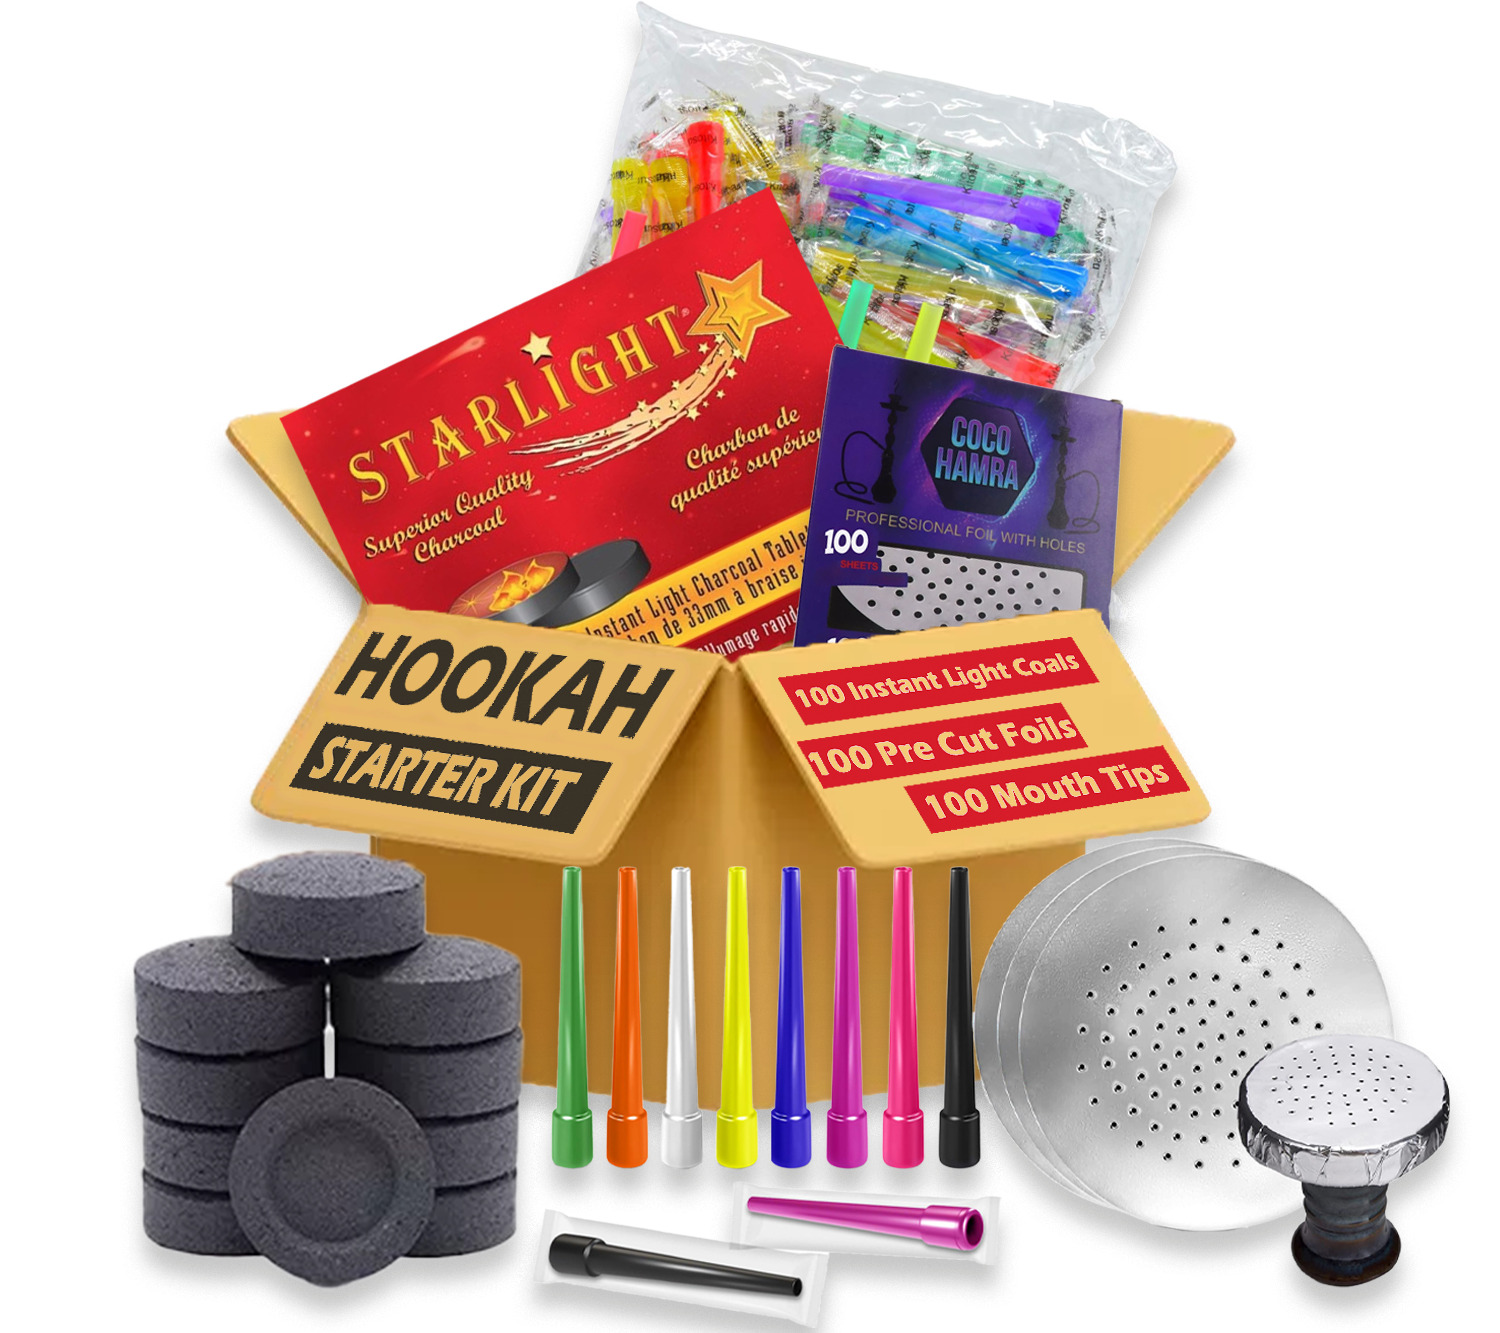 Hookah Accessories Kit: 100ct Starlight 40mm Coals / 100 Foils / 100 Mouth Tips